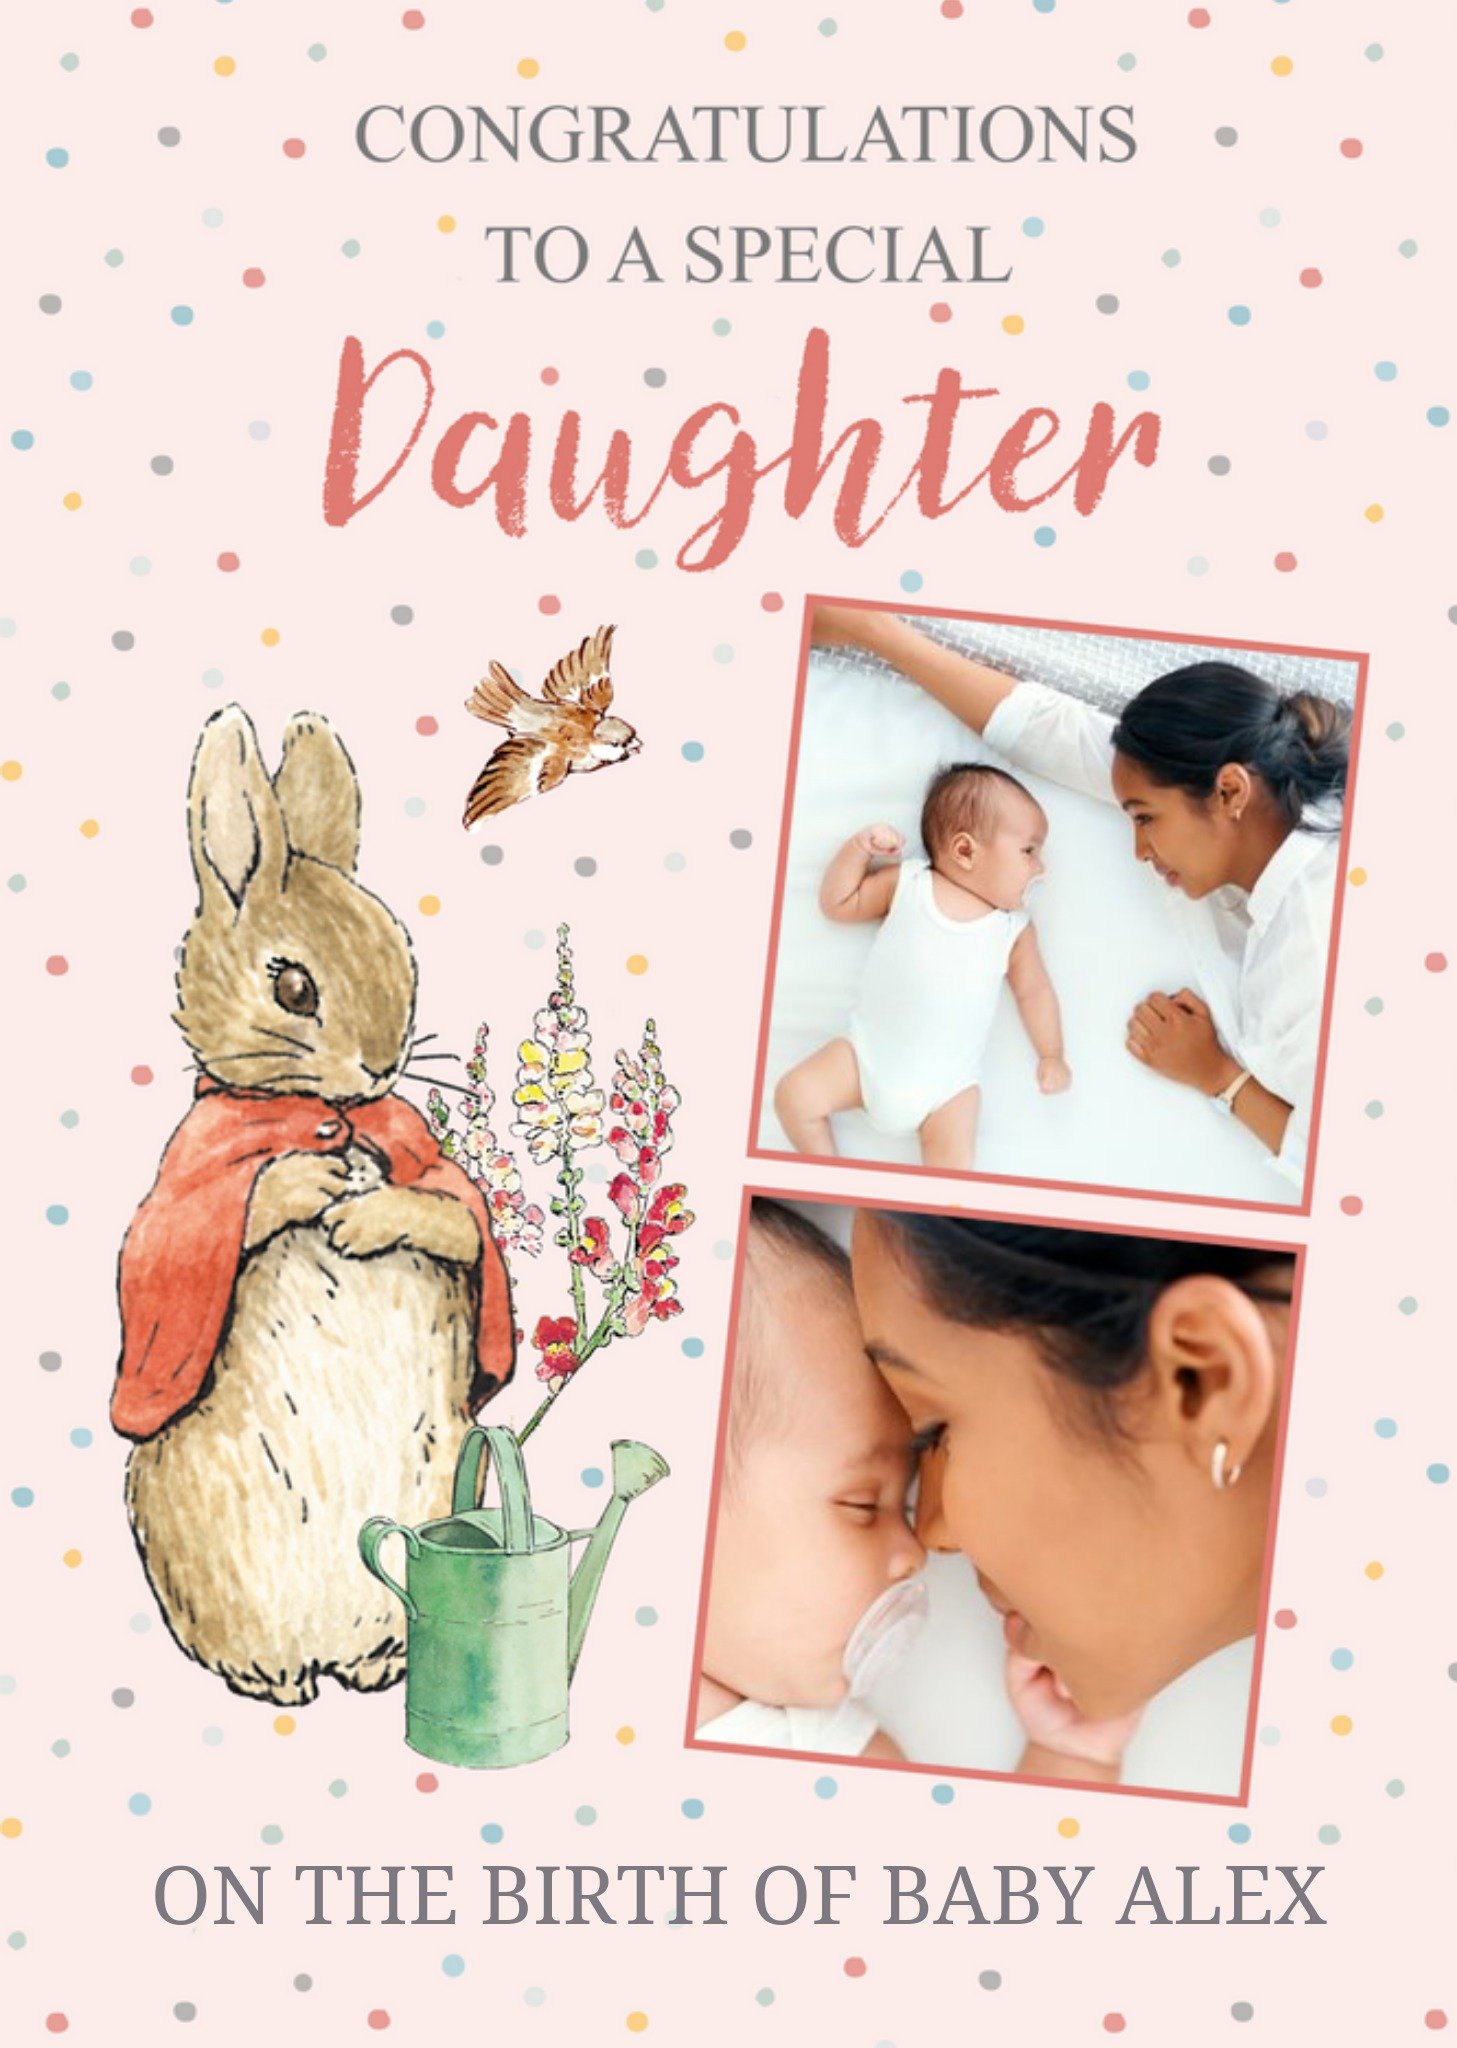 Beatrix Potter Peter Rabbit Congratulations To A Special Daughter Photo Upload New Baby Card, Large